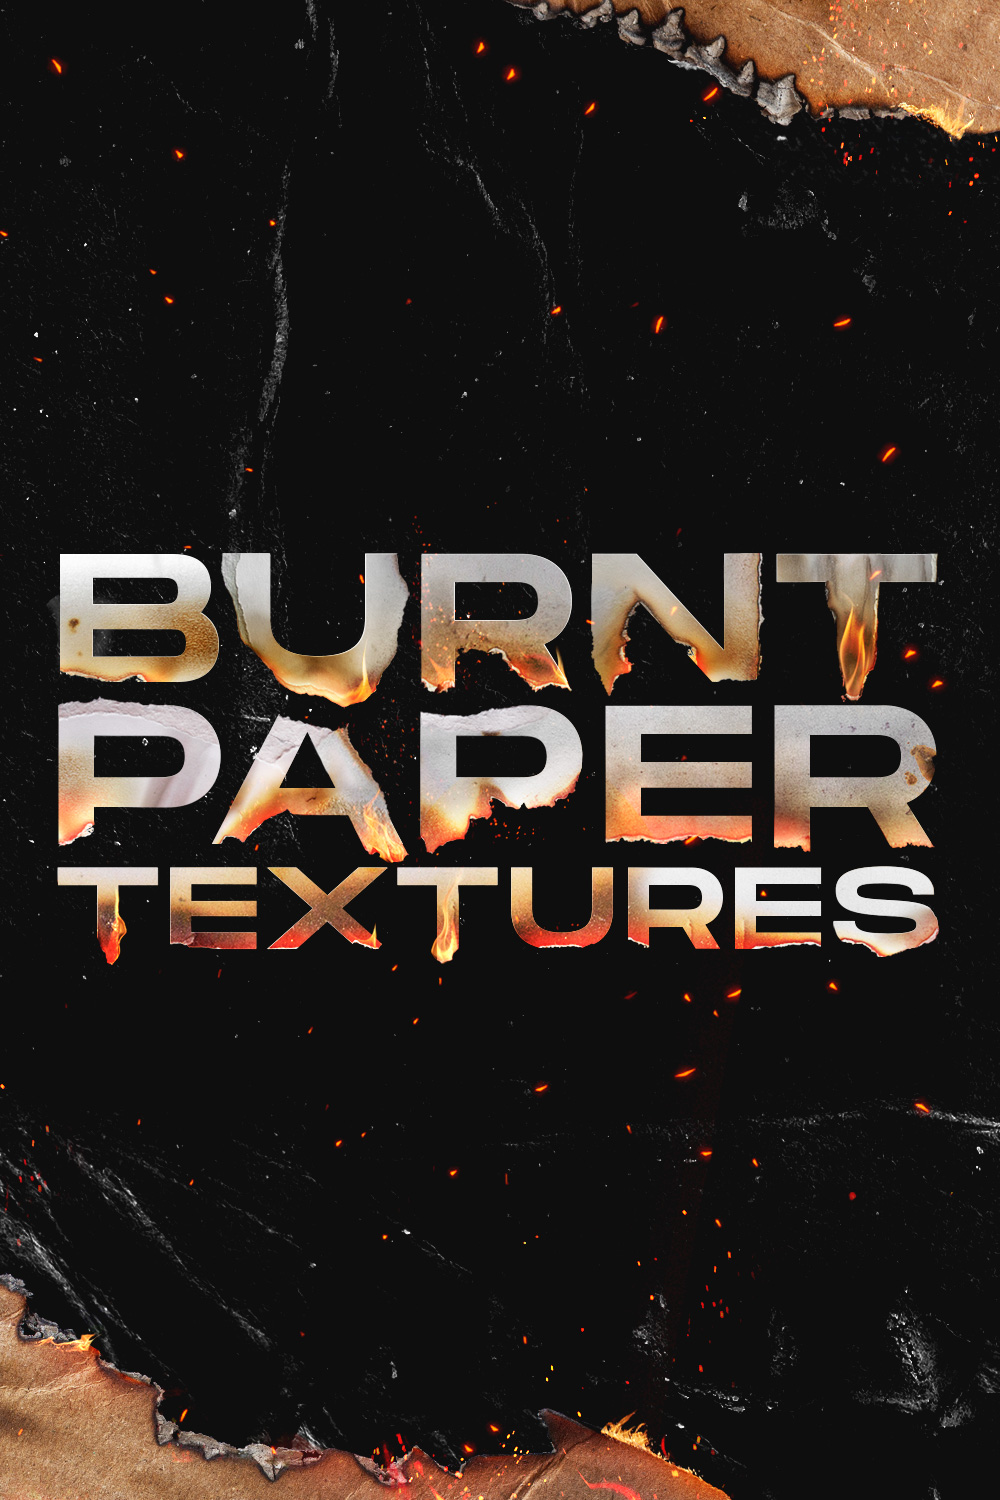 Torn and Burned Paper Textures Pinterest image.